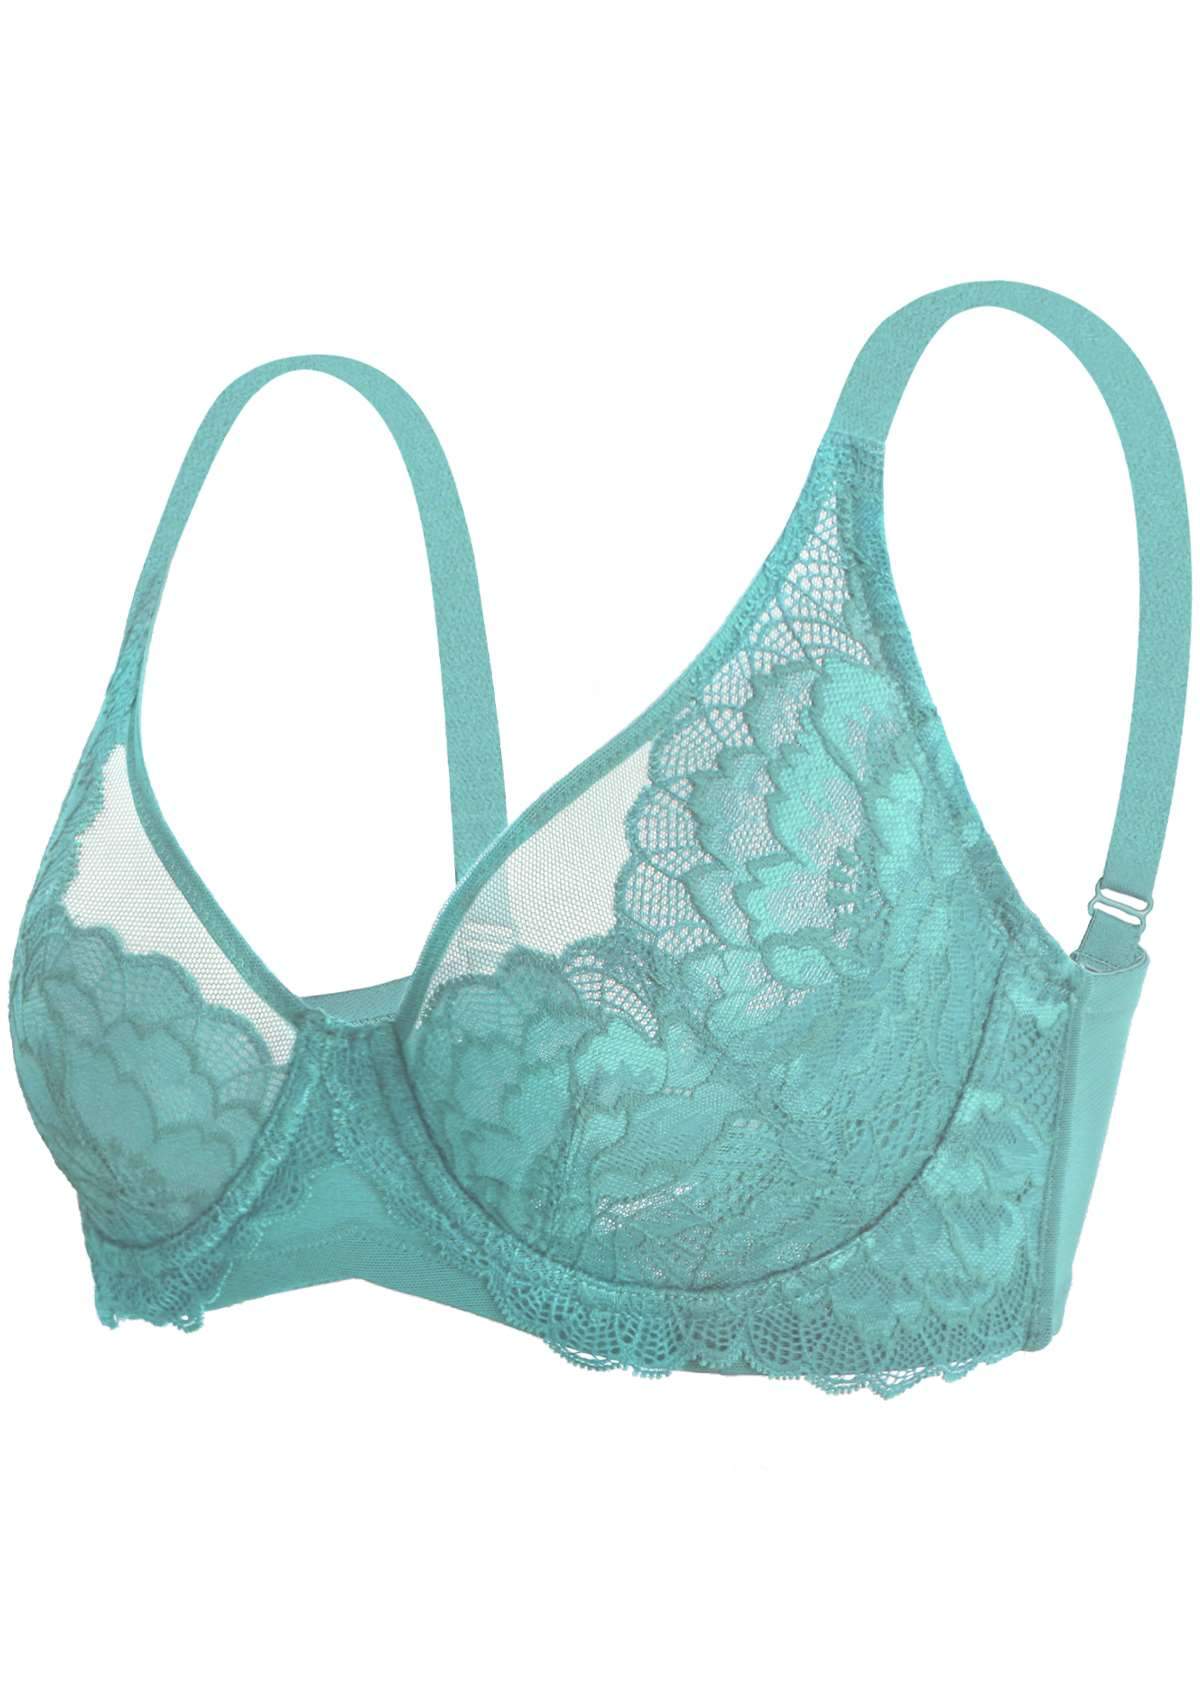 HSIA Paeonia Lace Full Coverage Underwire Non-Padded Uplifting Bra - Light Coral / 34 / DDD/F